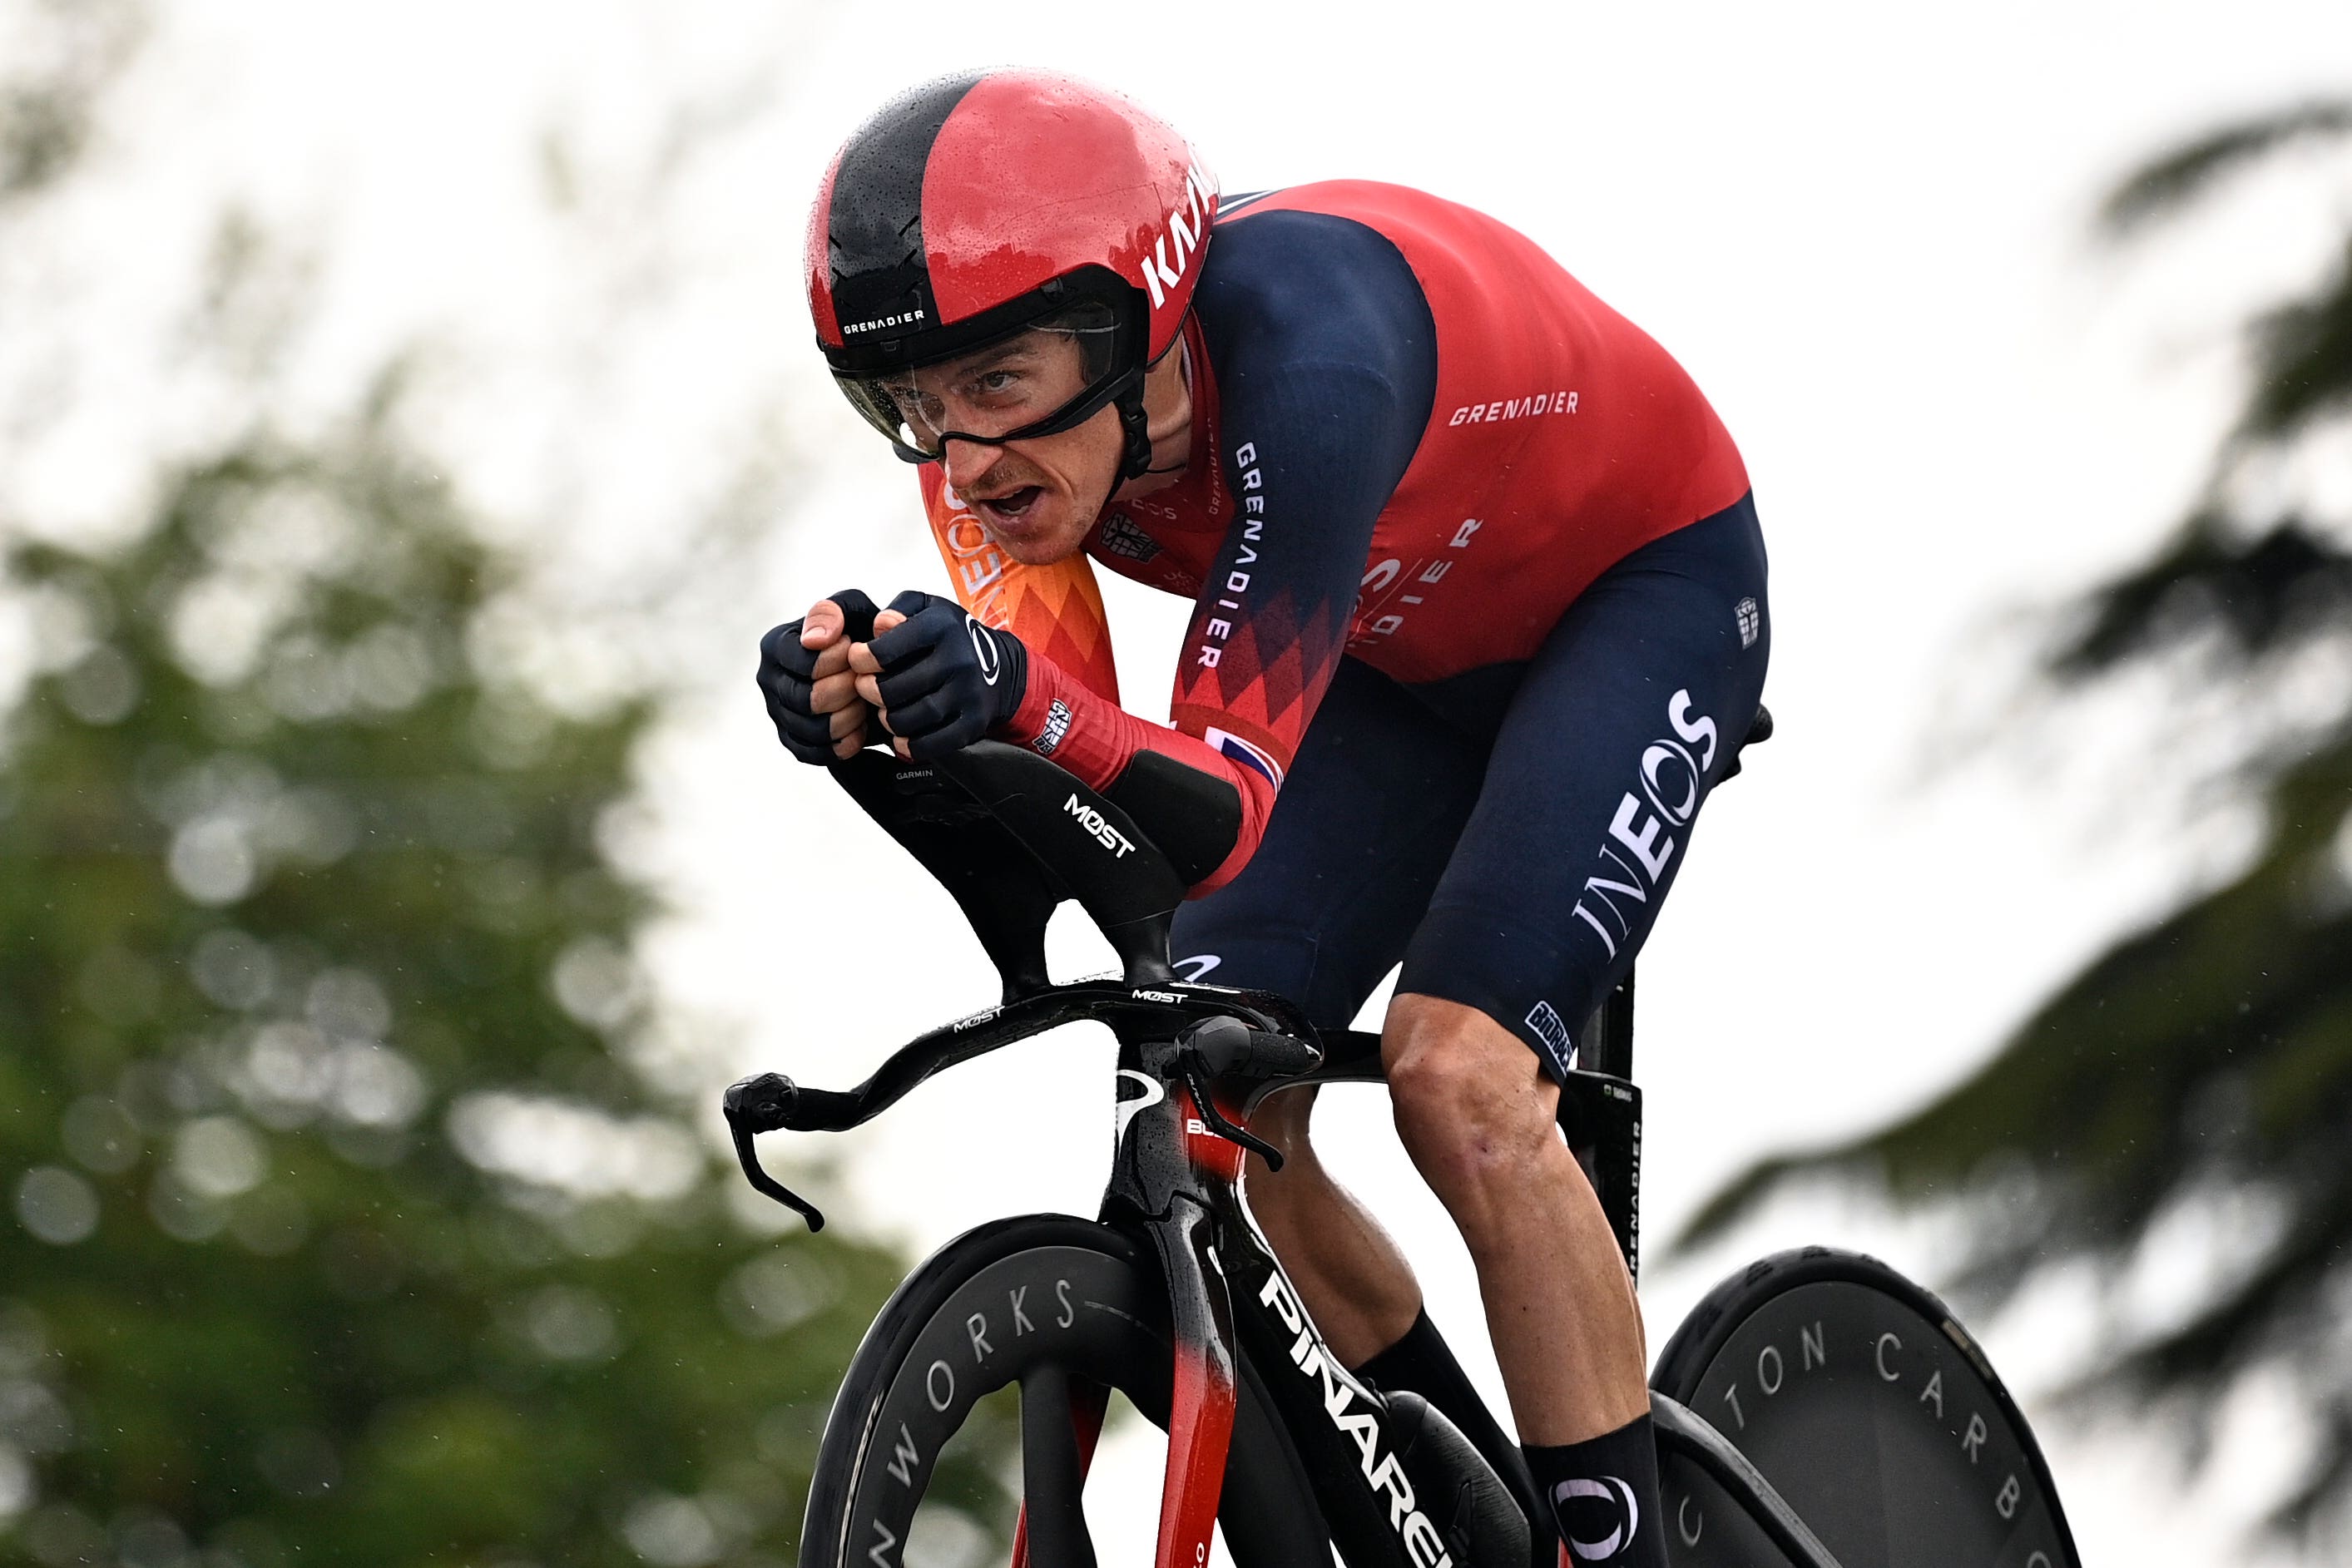 Geraint Thomas had been beaten by one second in Sunday’s time trial